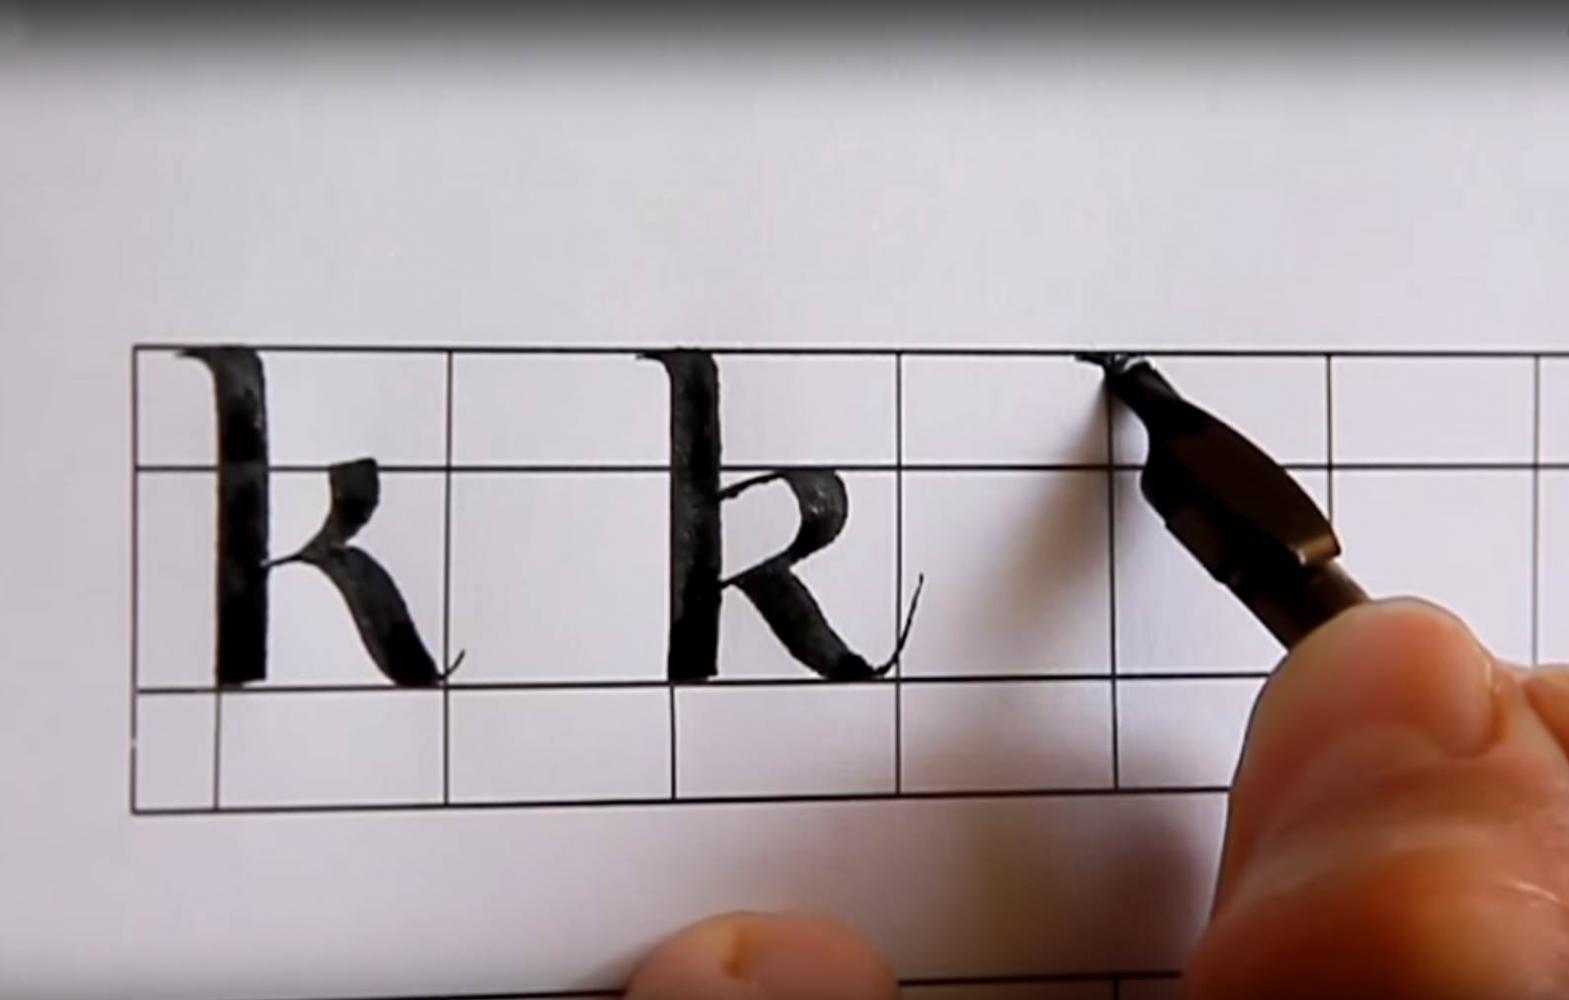 Calligraphyc tracing of Uncial letters part two